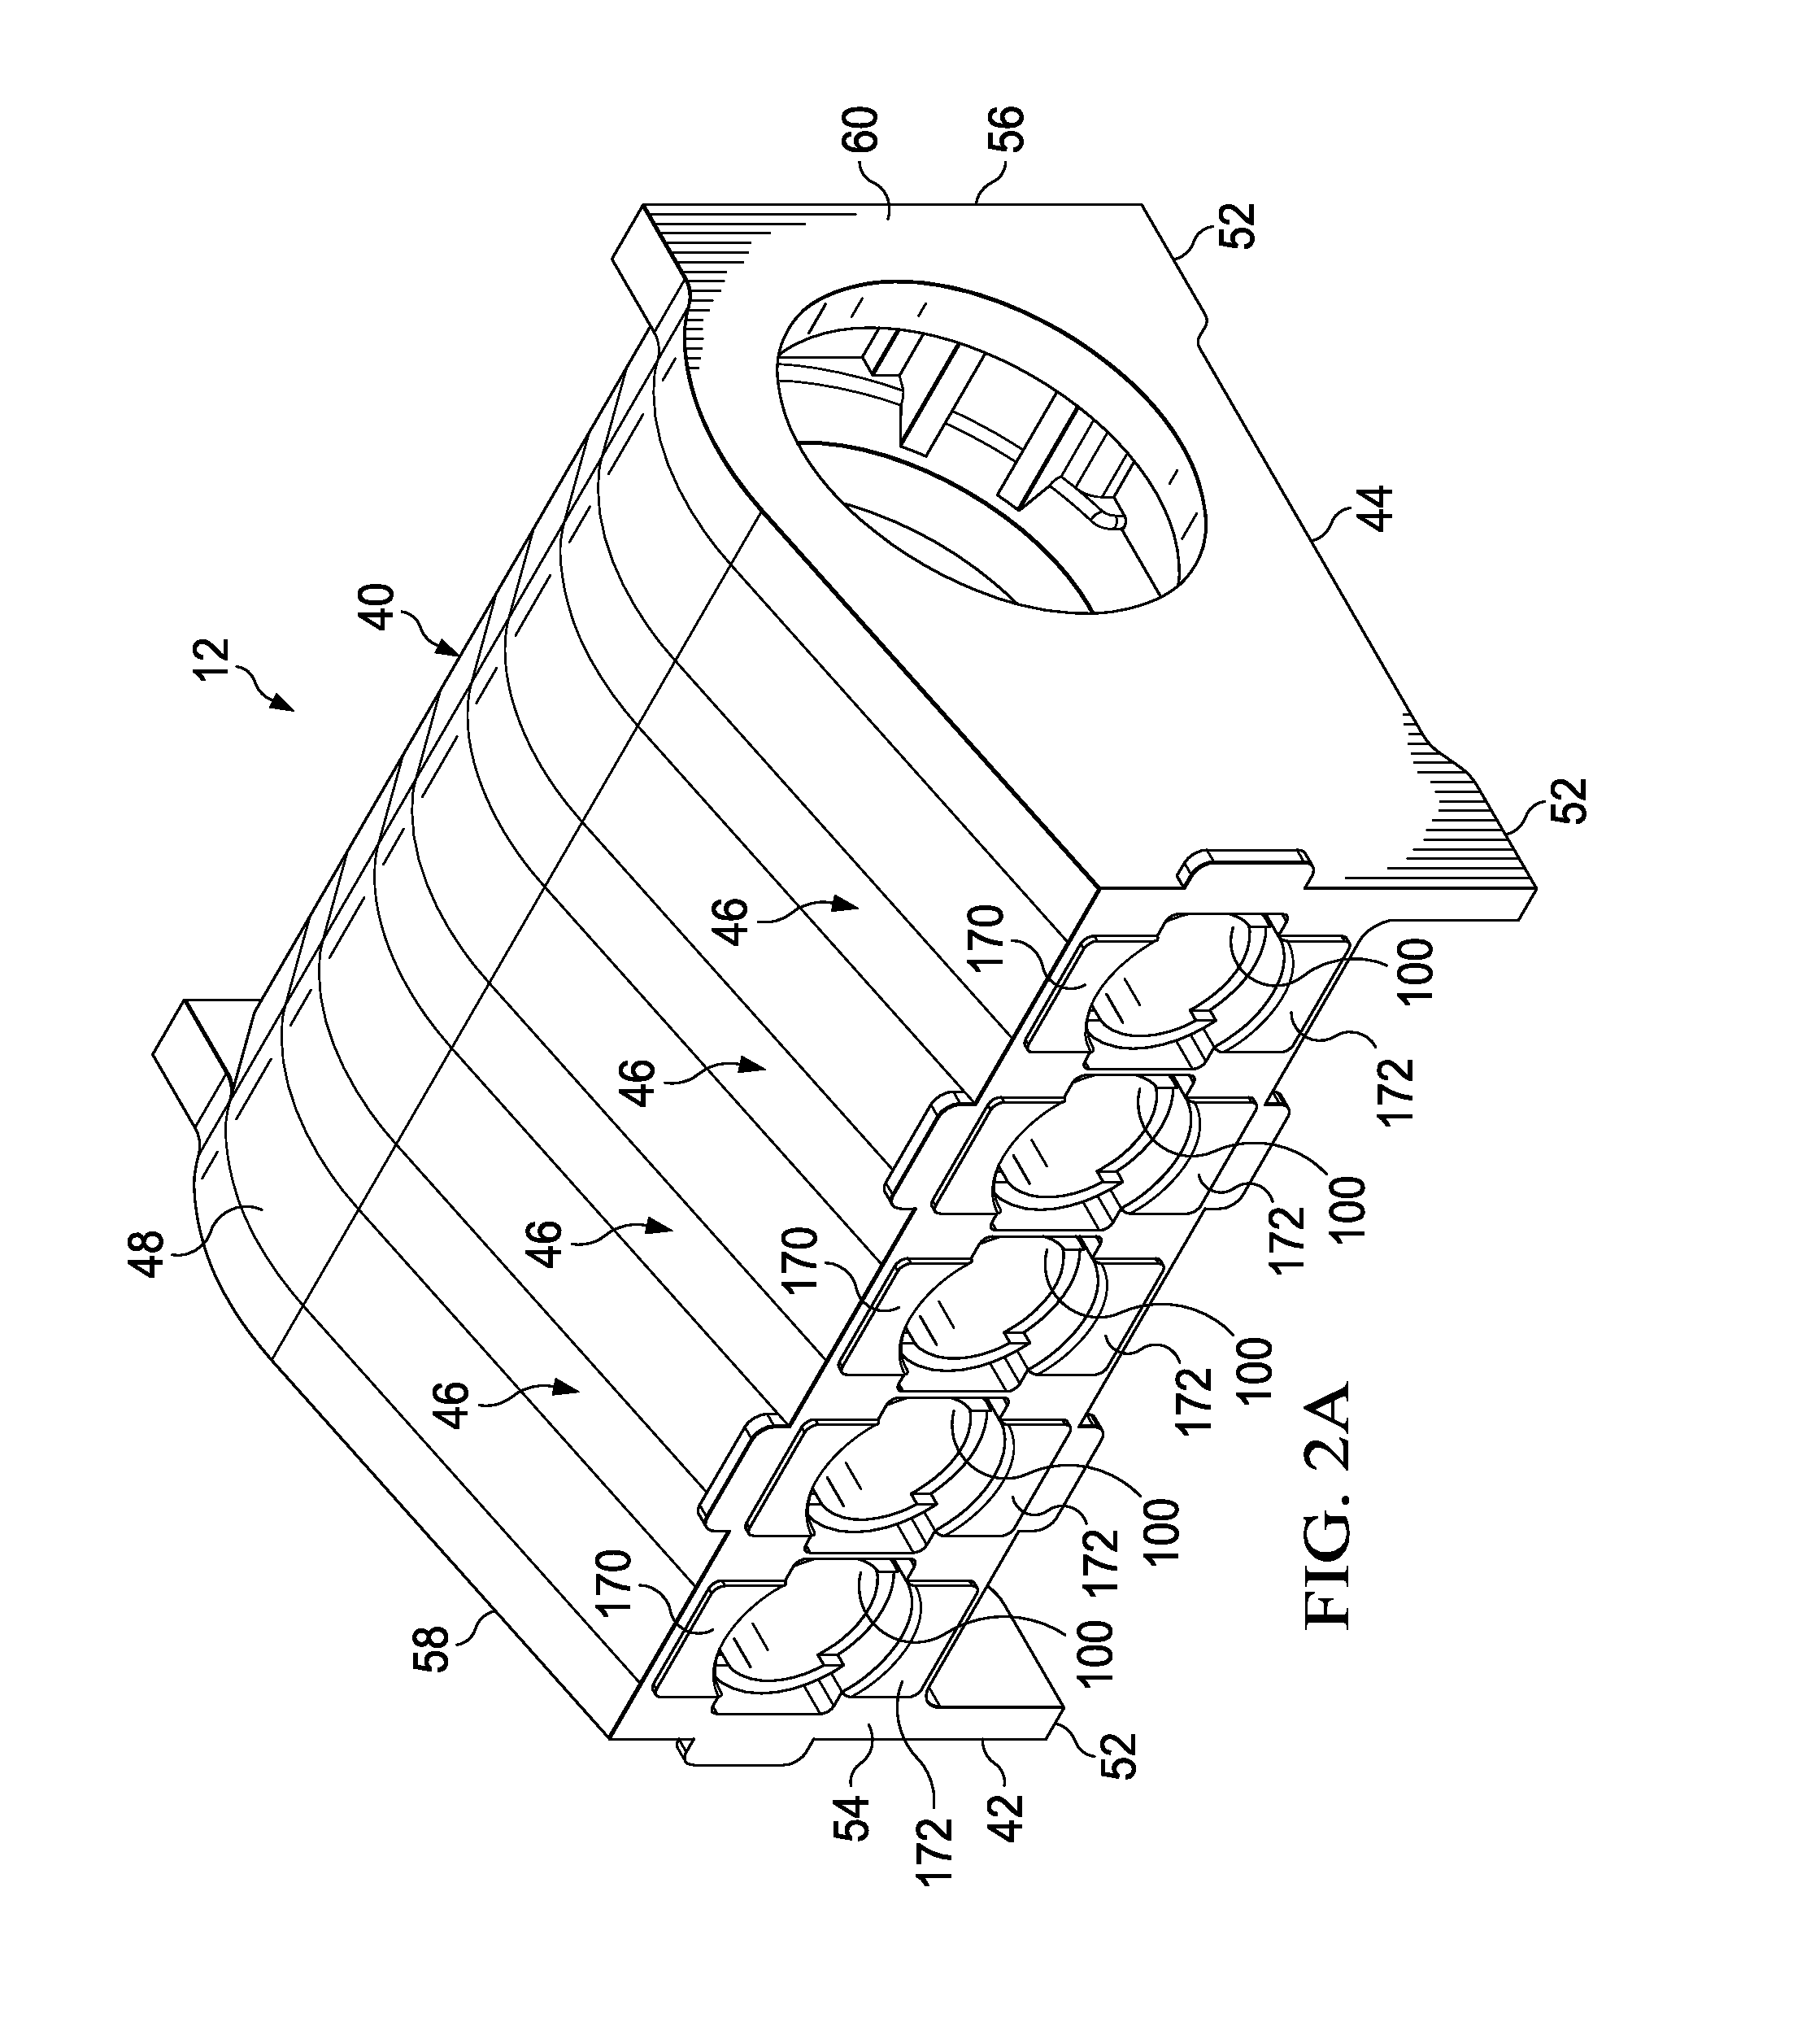 System and method for reinforcing reciprocating pump